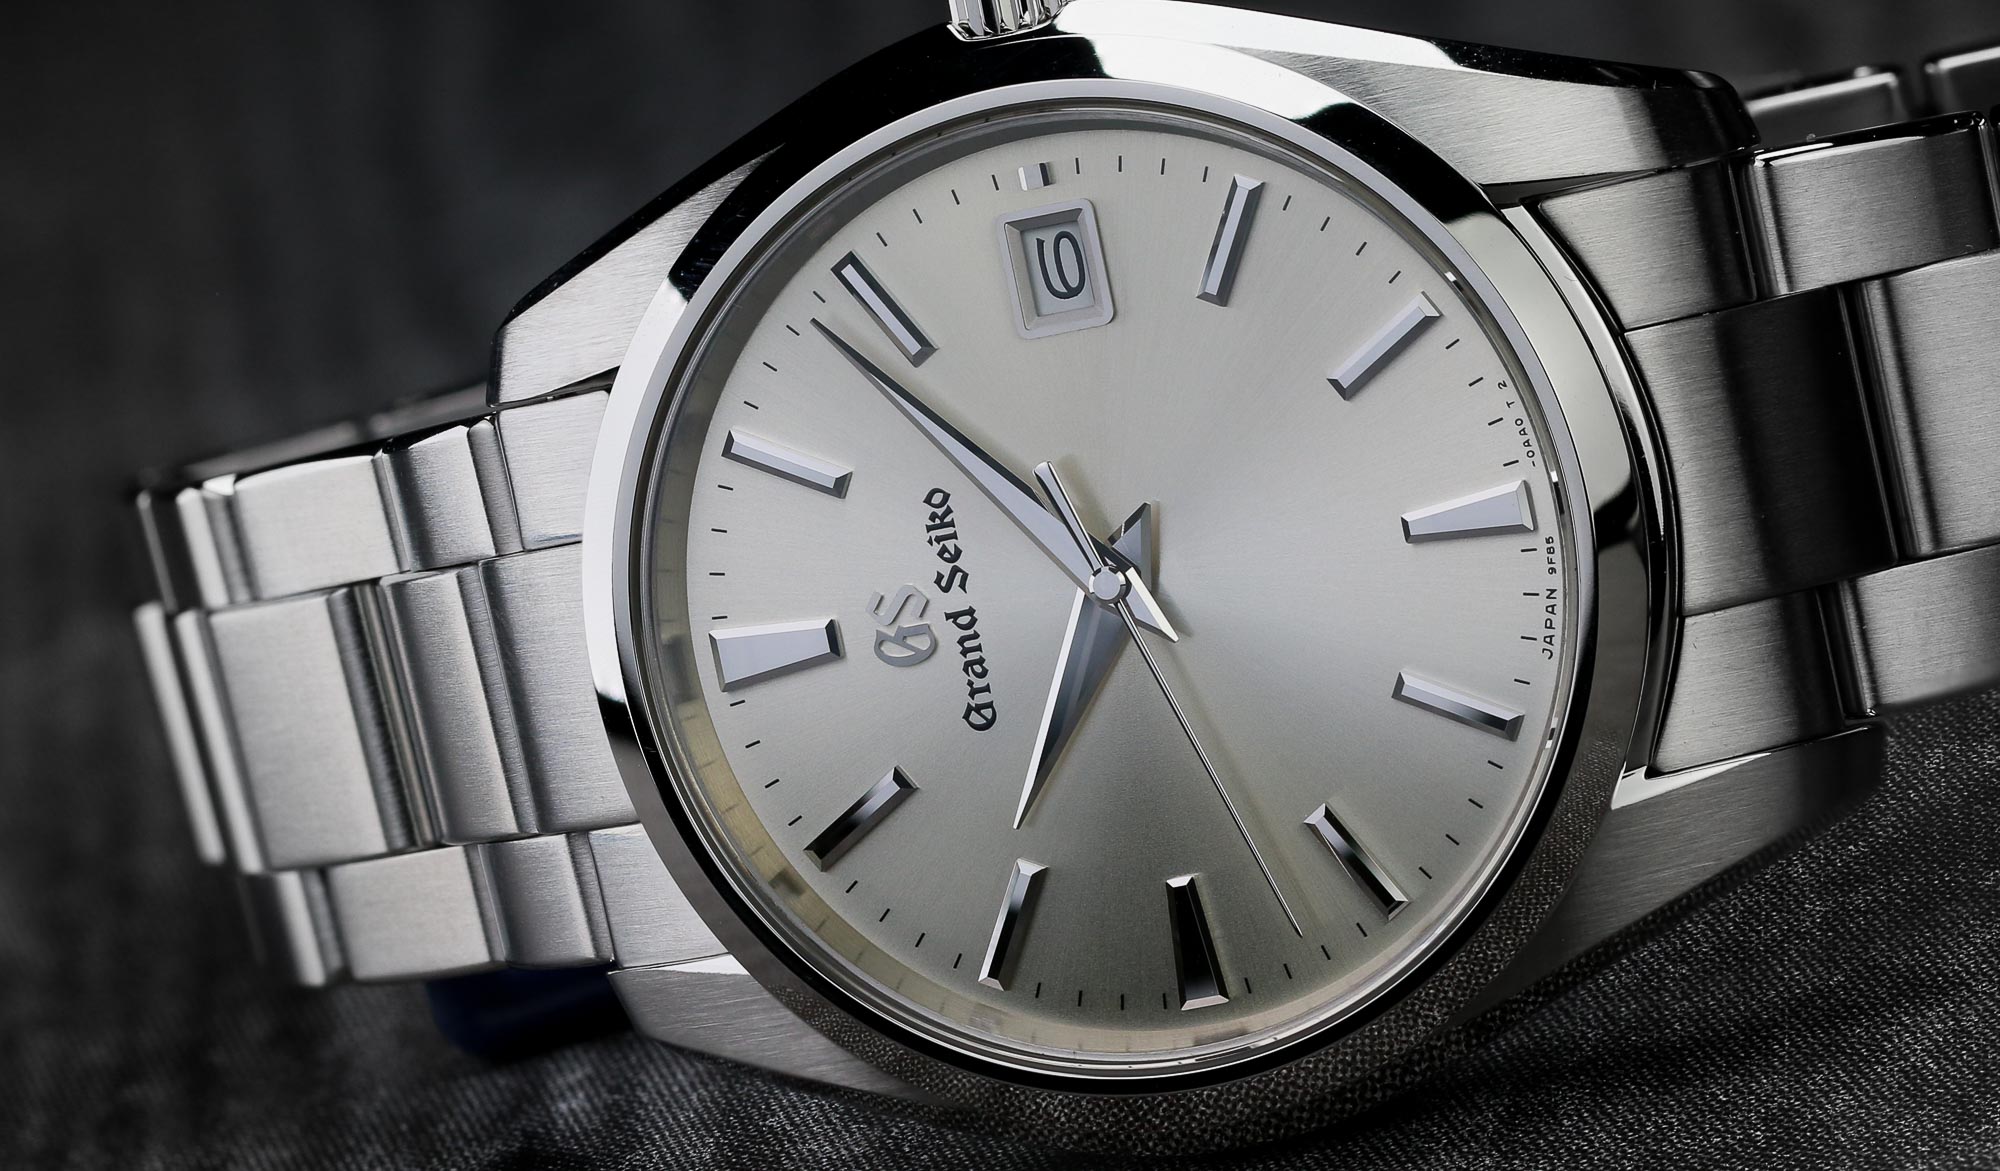 Closeup of the dial of Grand Seiko SBGP009 stainless steel wristwatch with silver dial.